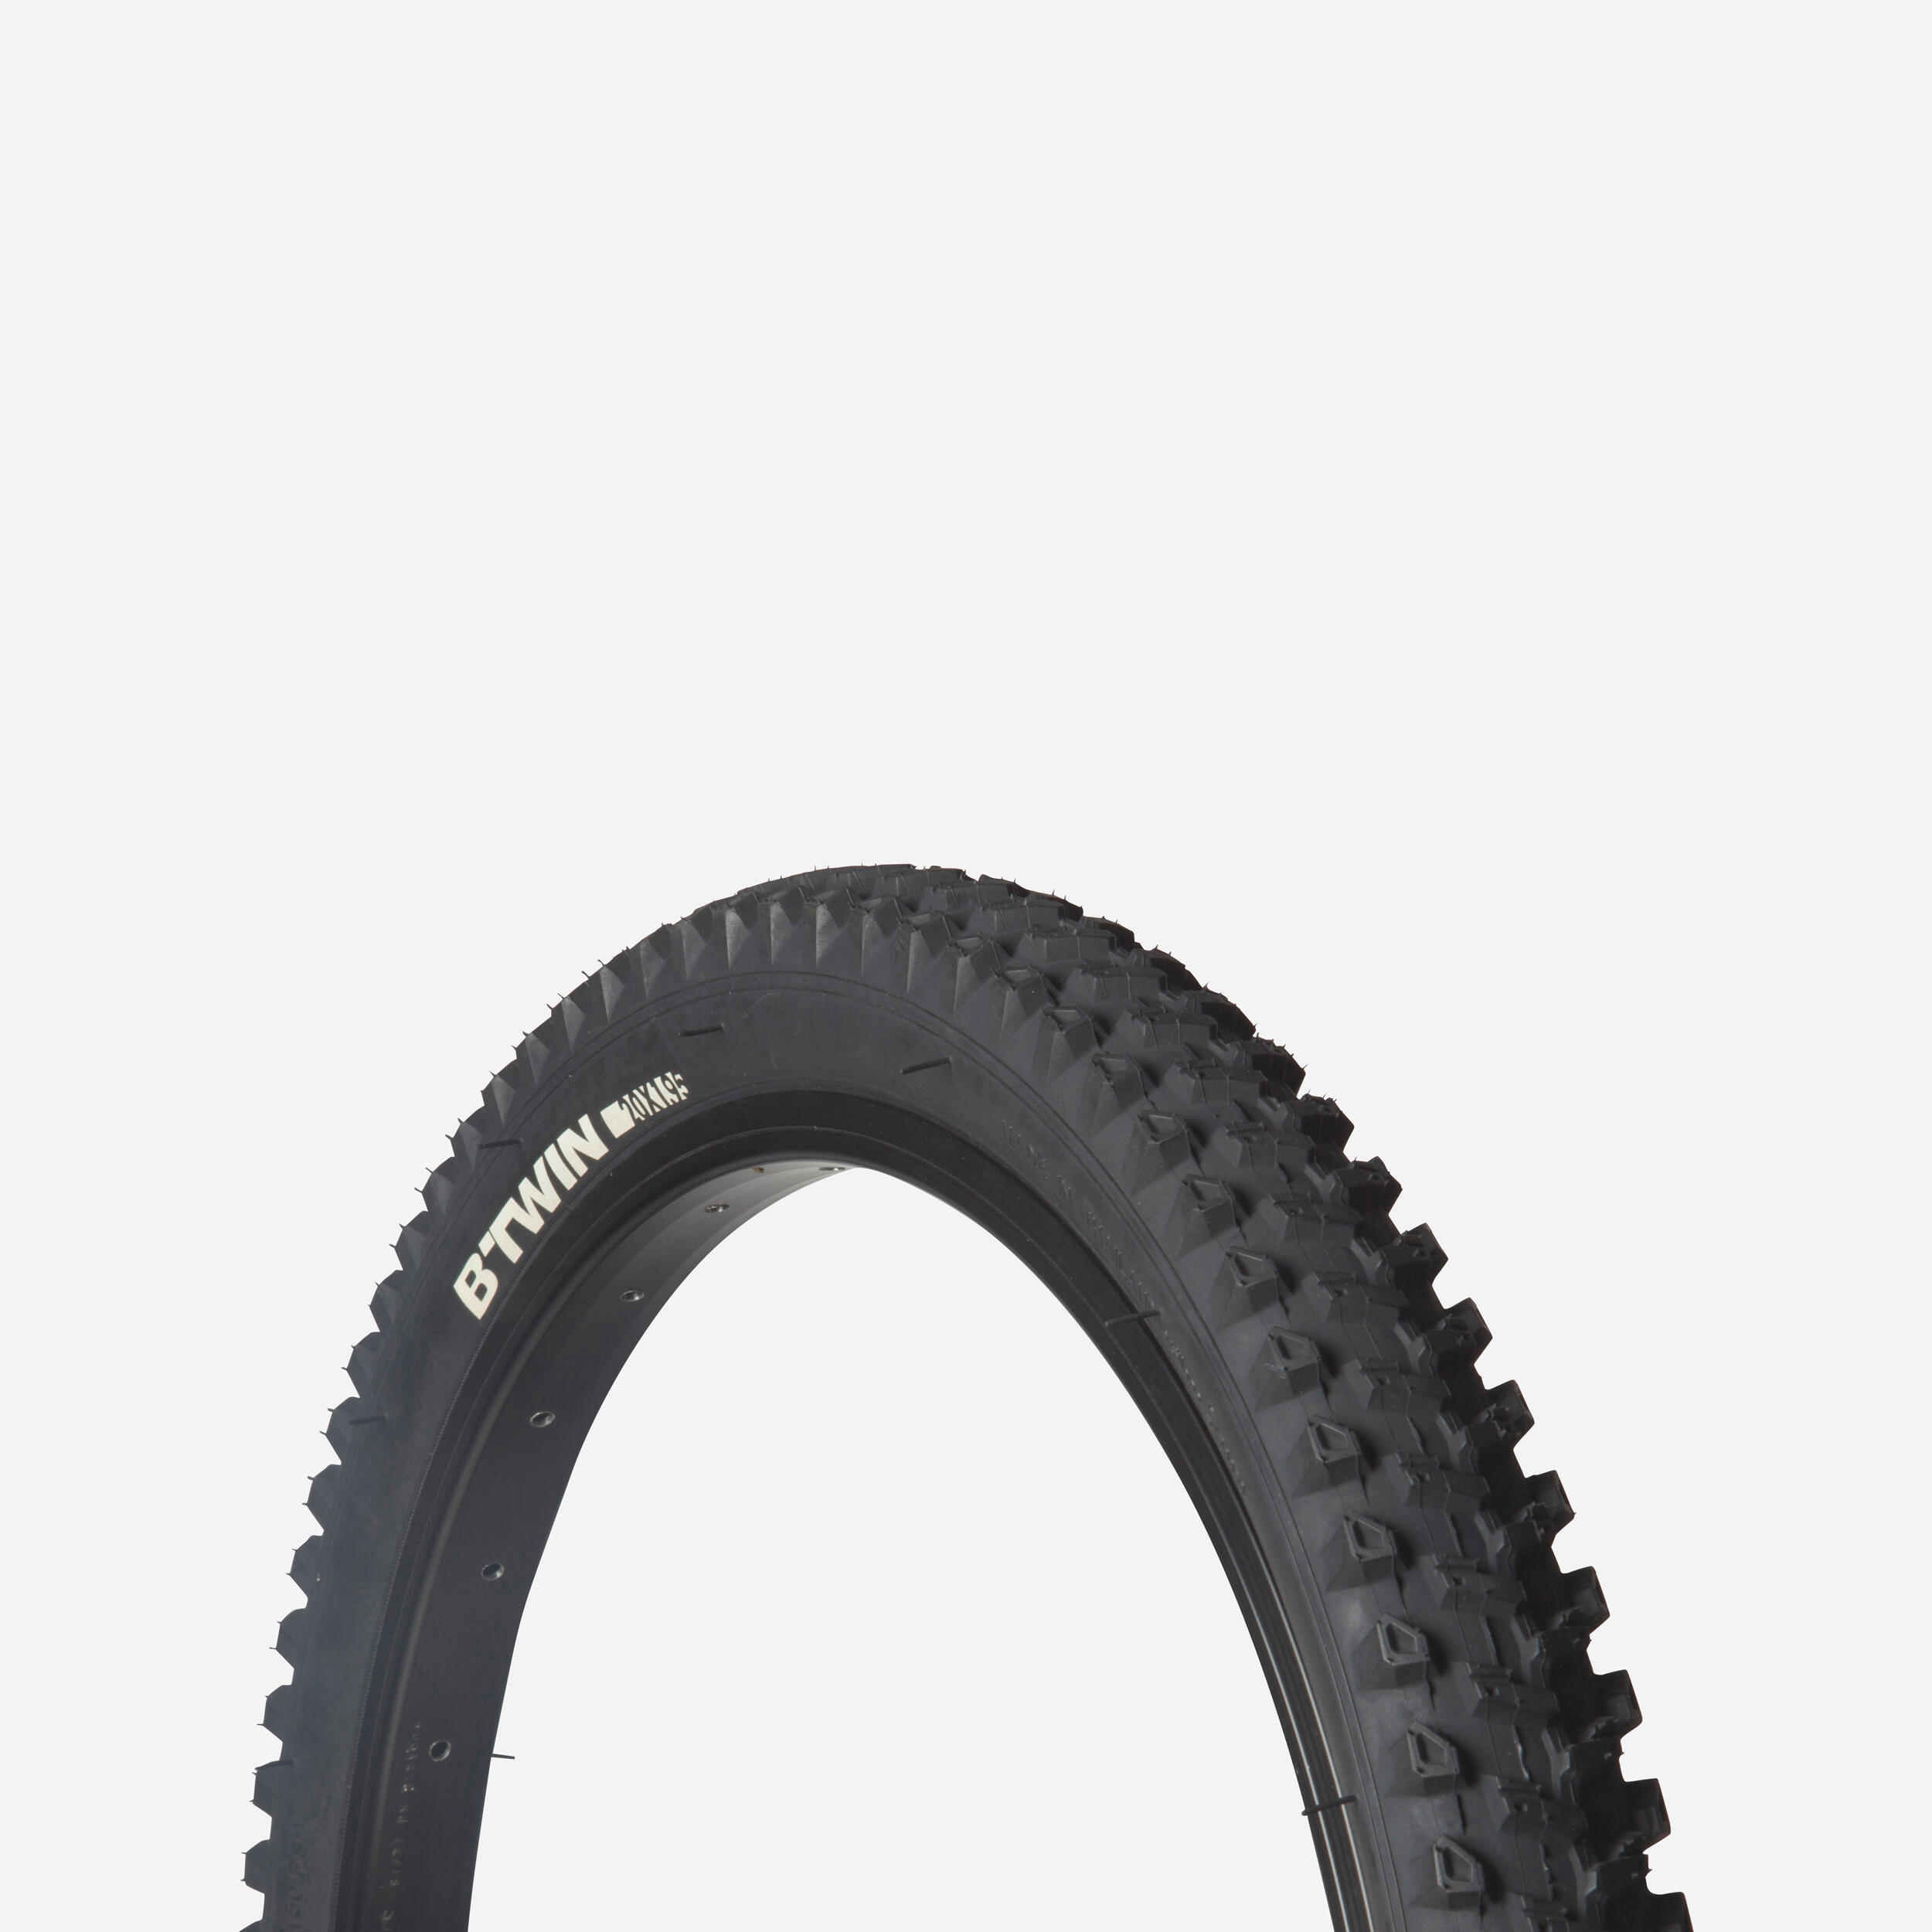 20 inch bike tyres for sale